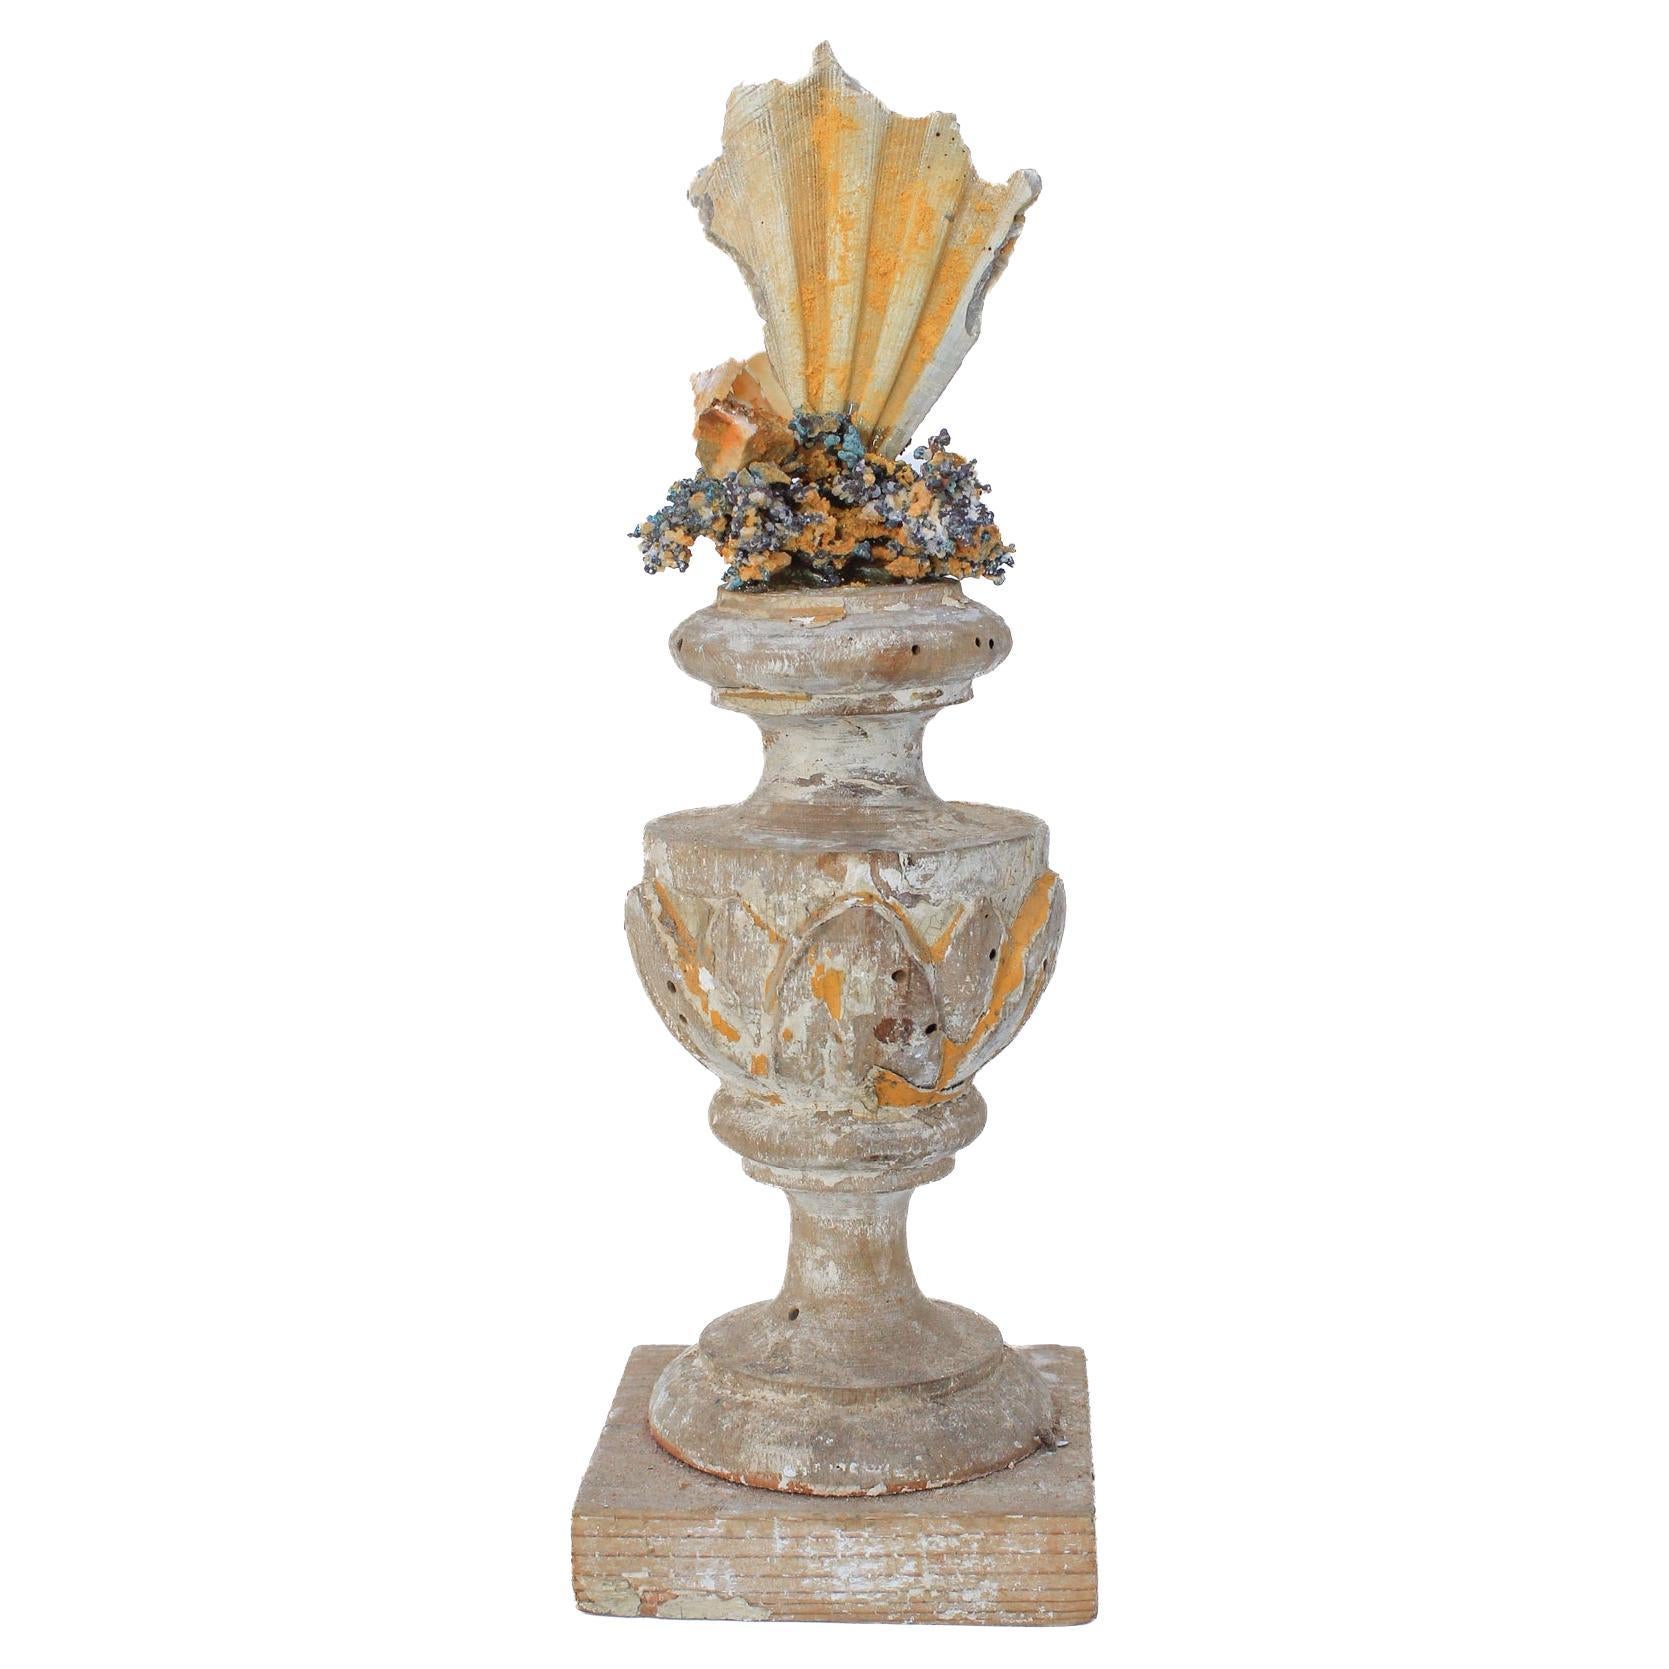 17th Century Italian Vase with a Chesapecten Shell & Free-Forming Copper